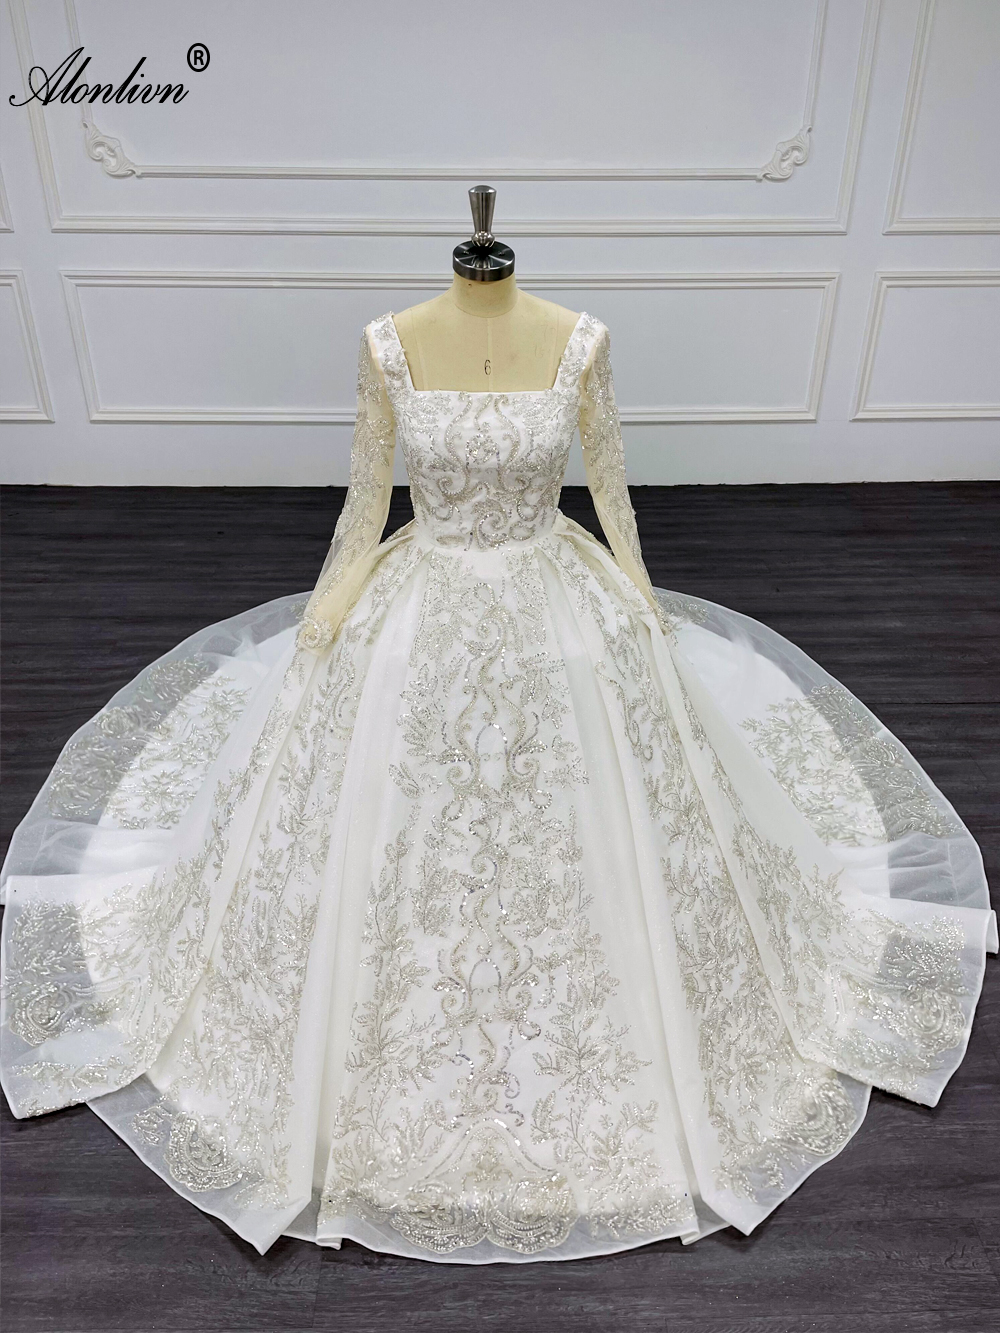 Alonlivn100% Real Photos Luxury Square Collar A Line Wedding Dress With Beading Rhinestones Pearls Embroidery Lace Full Sleeve Bridal Gowns